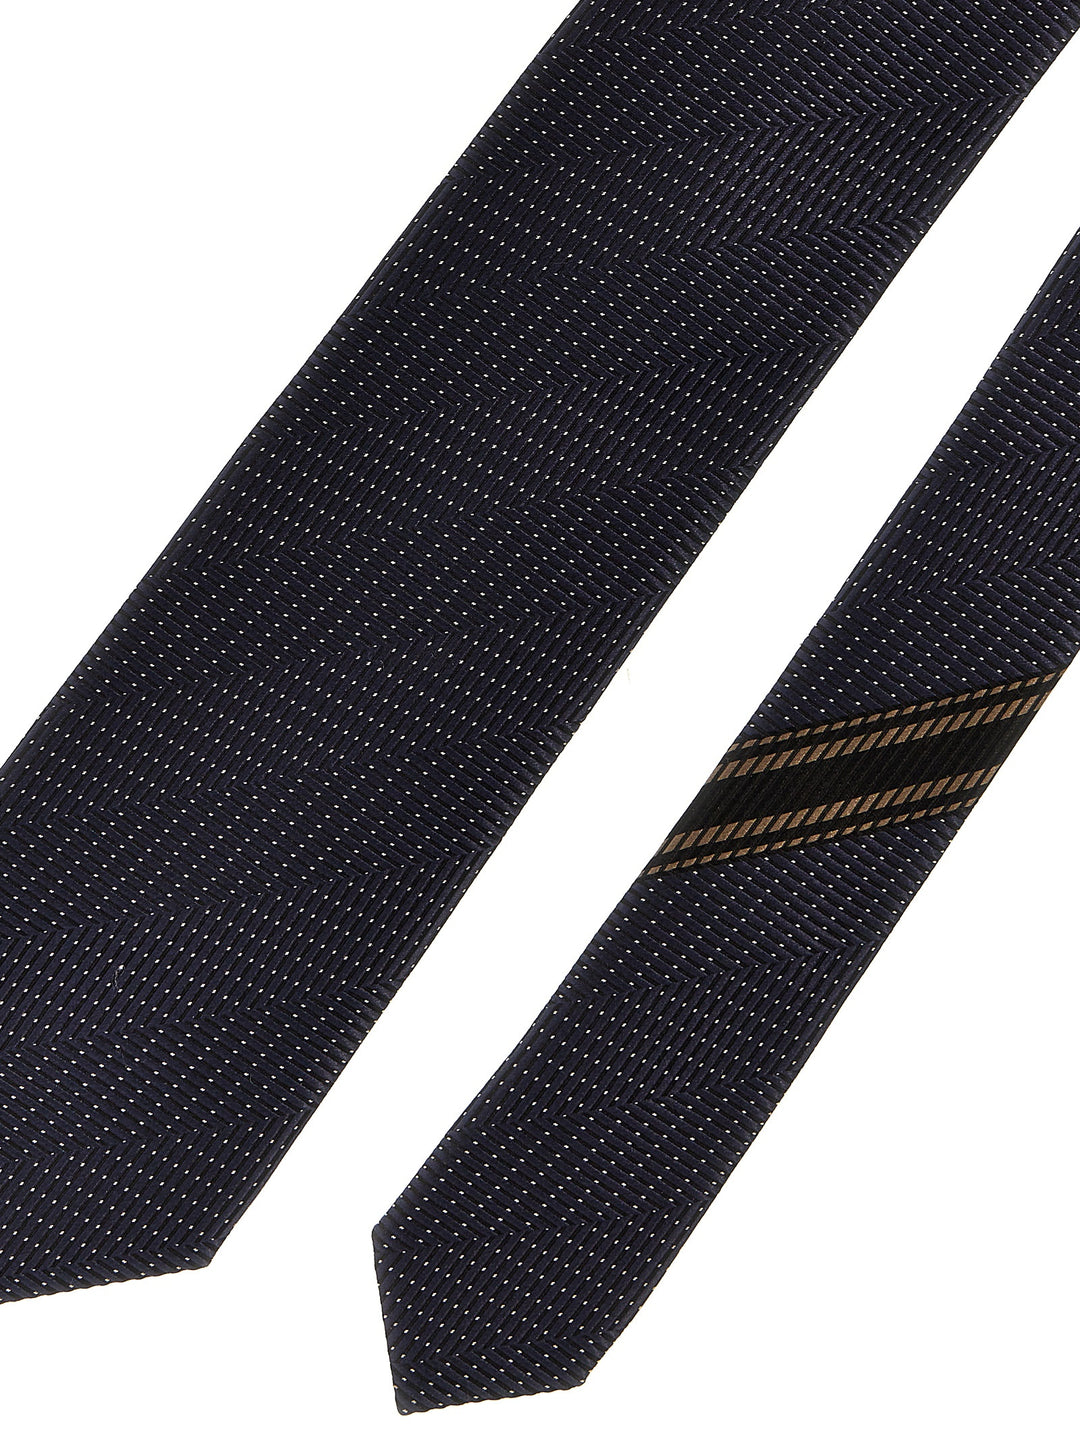 Micro Operated Patterned Tie Cravatte Blu